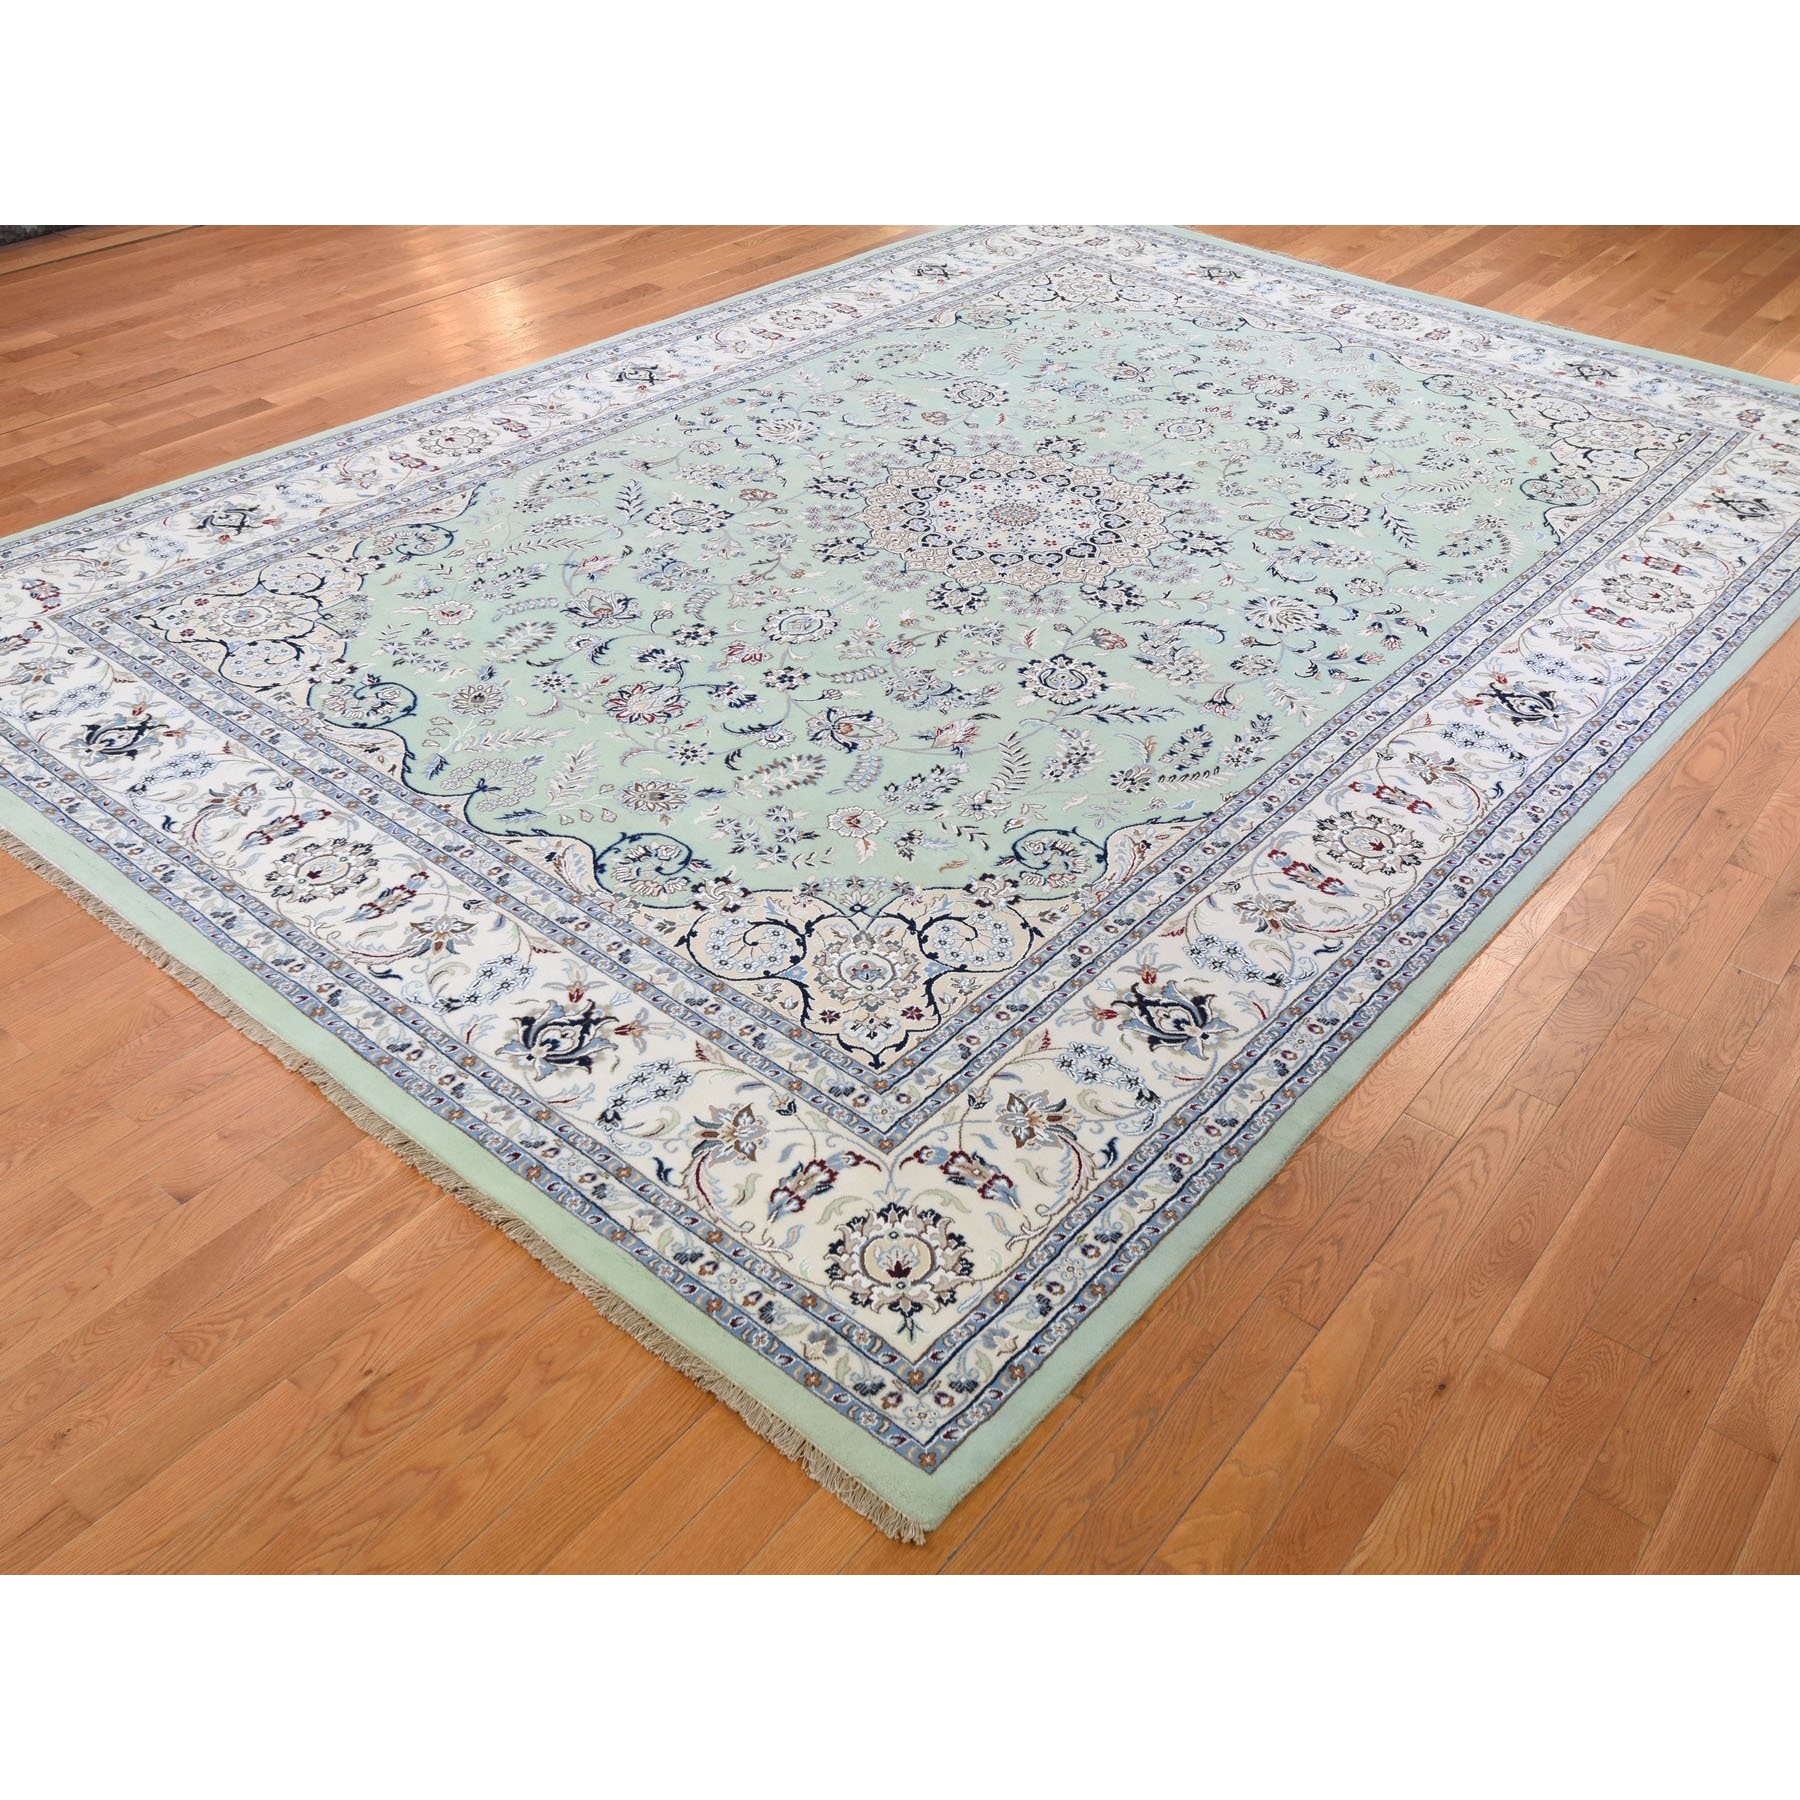 10-x14- Wool And Silk 250 KPSI Light Green Nain Hand-Knotted Oriental Rug 